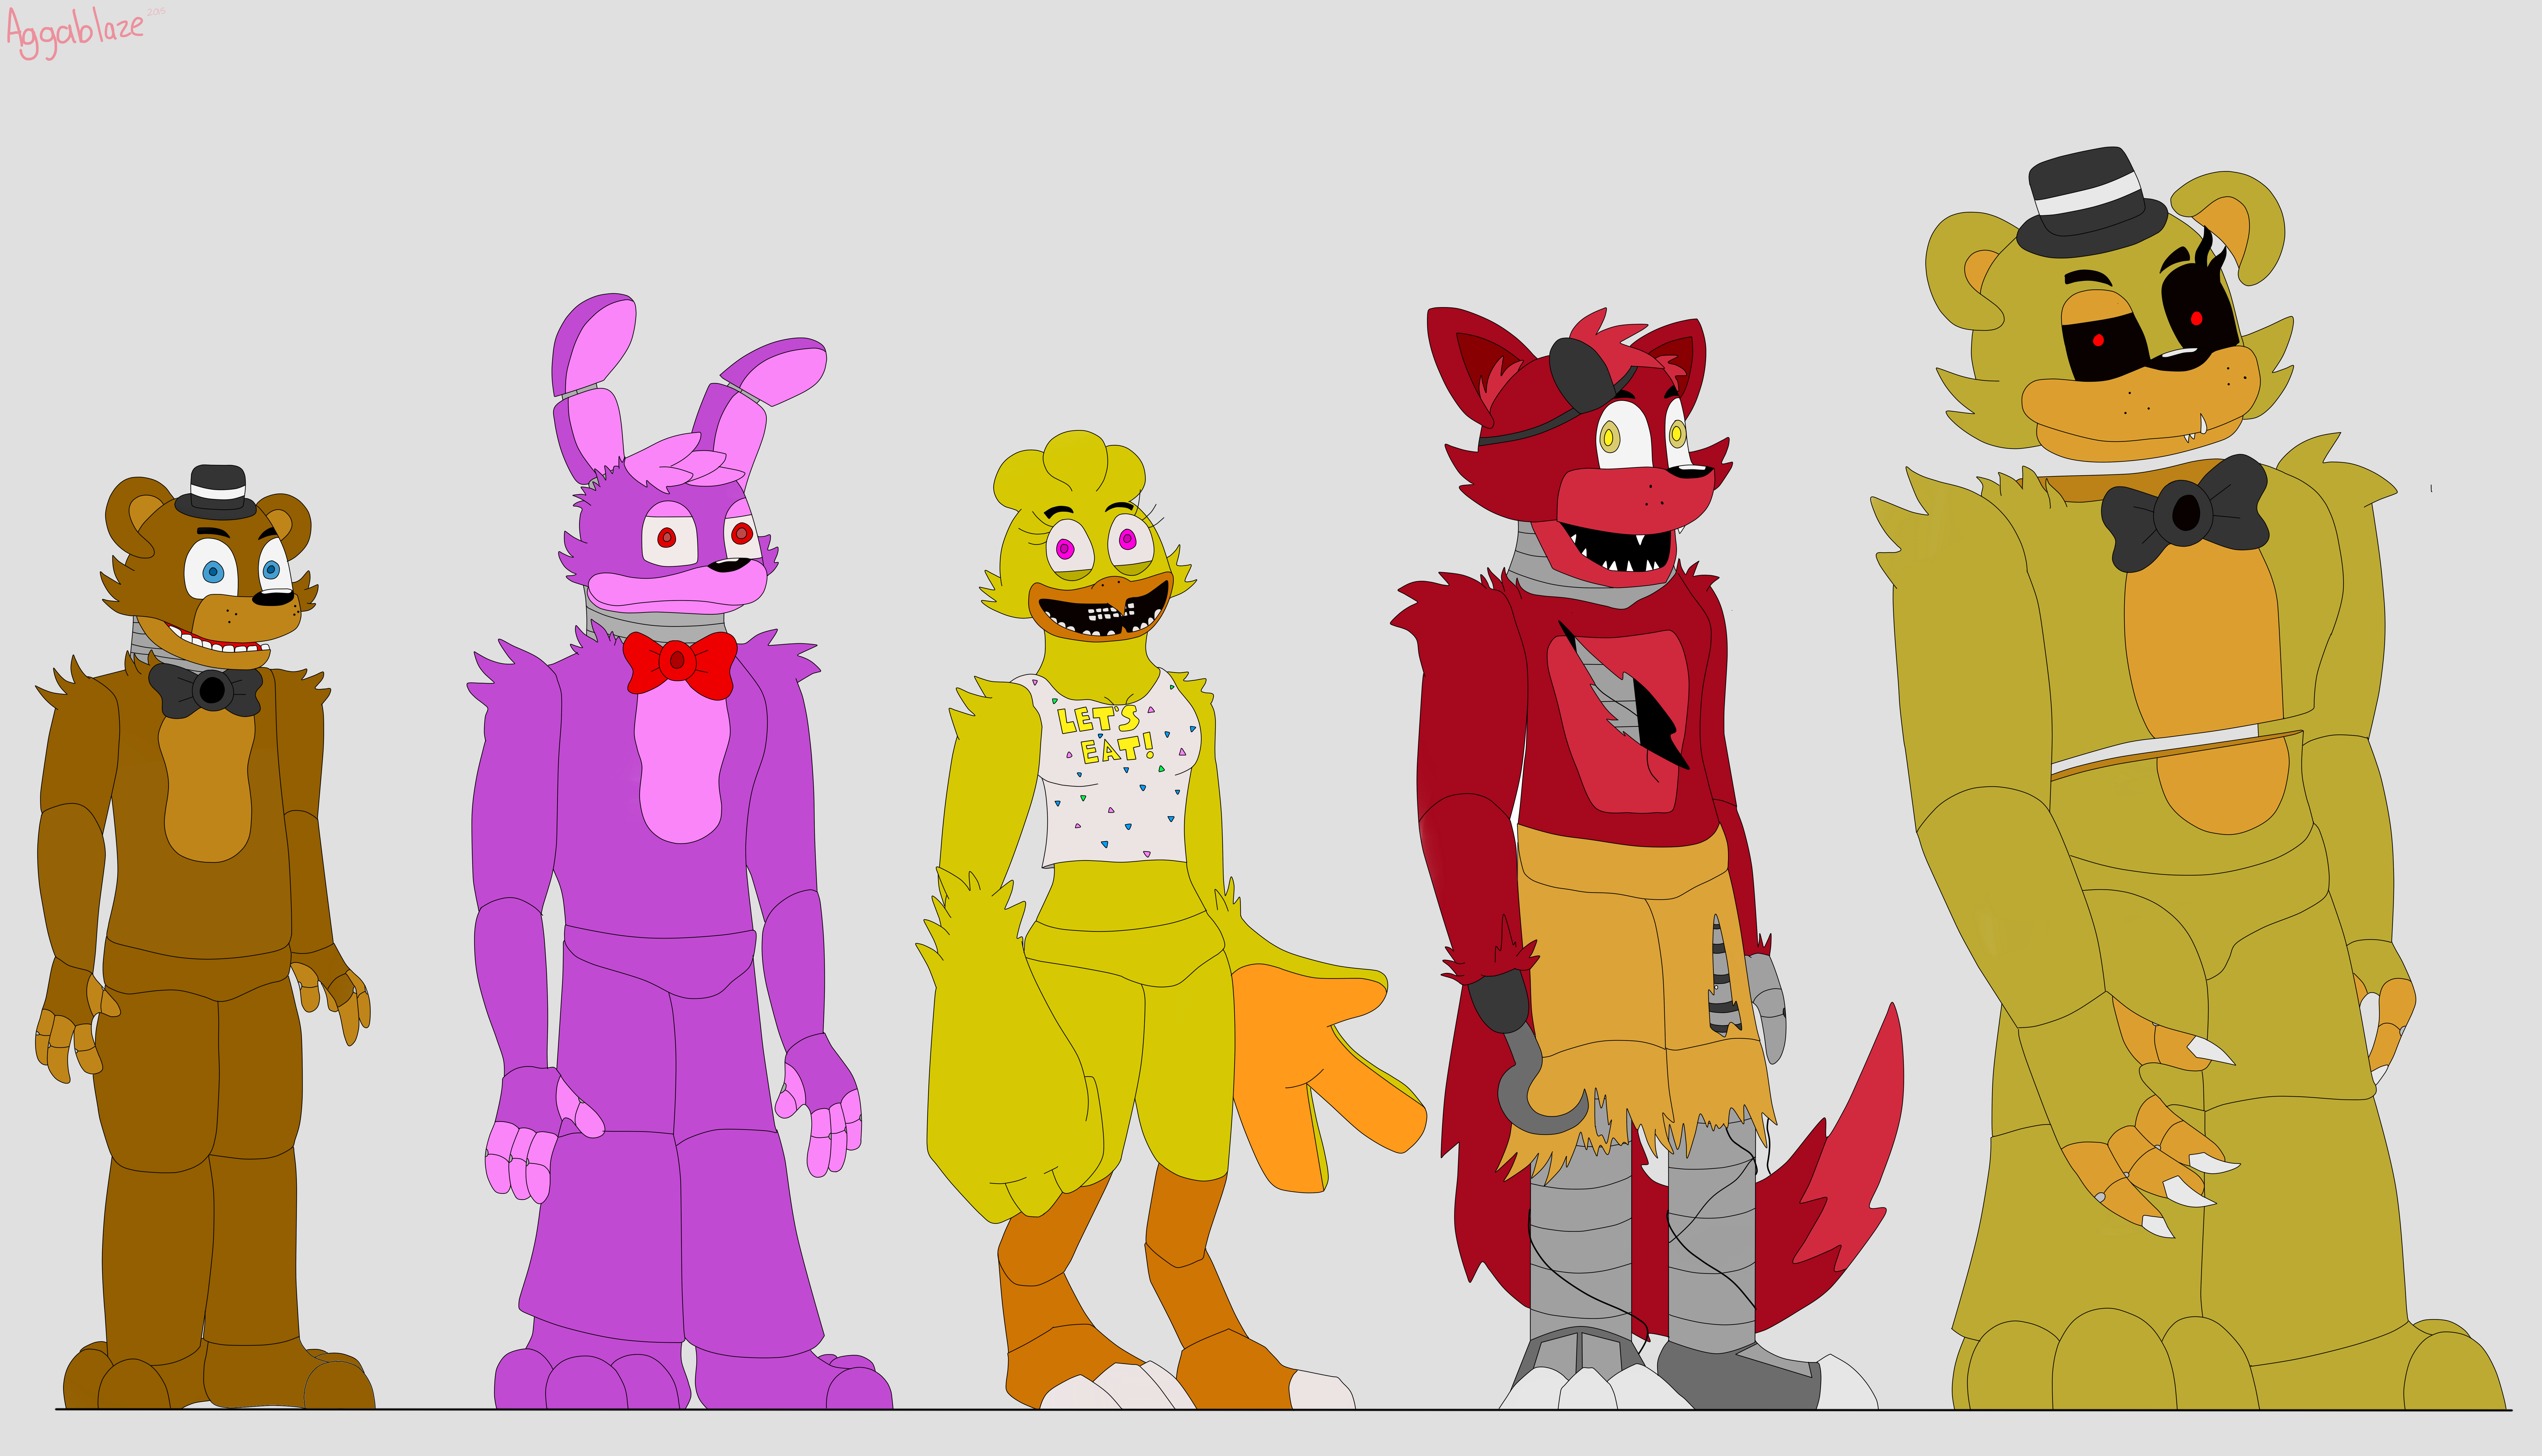 FNAF Height Chart (Phantoms Not Included) by FNASMia521 on DeviantArt